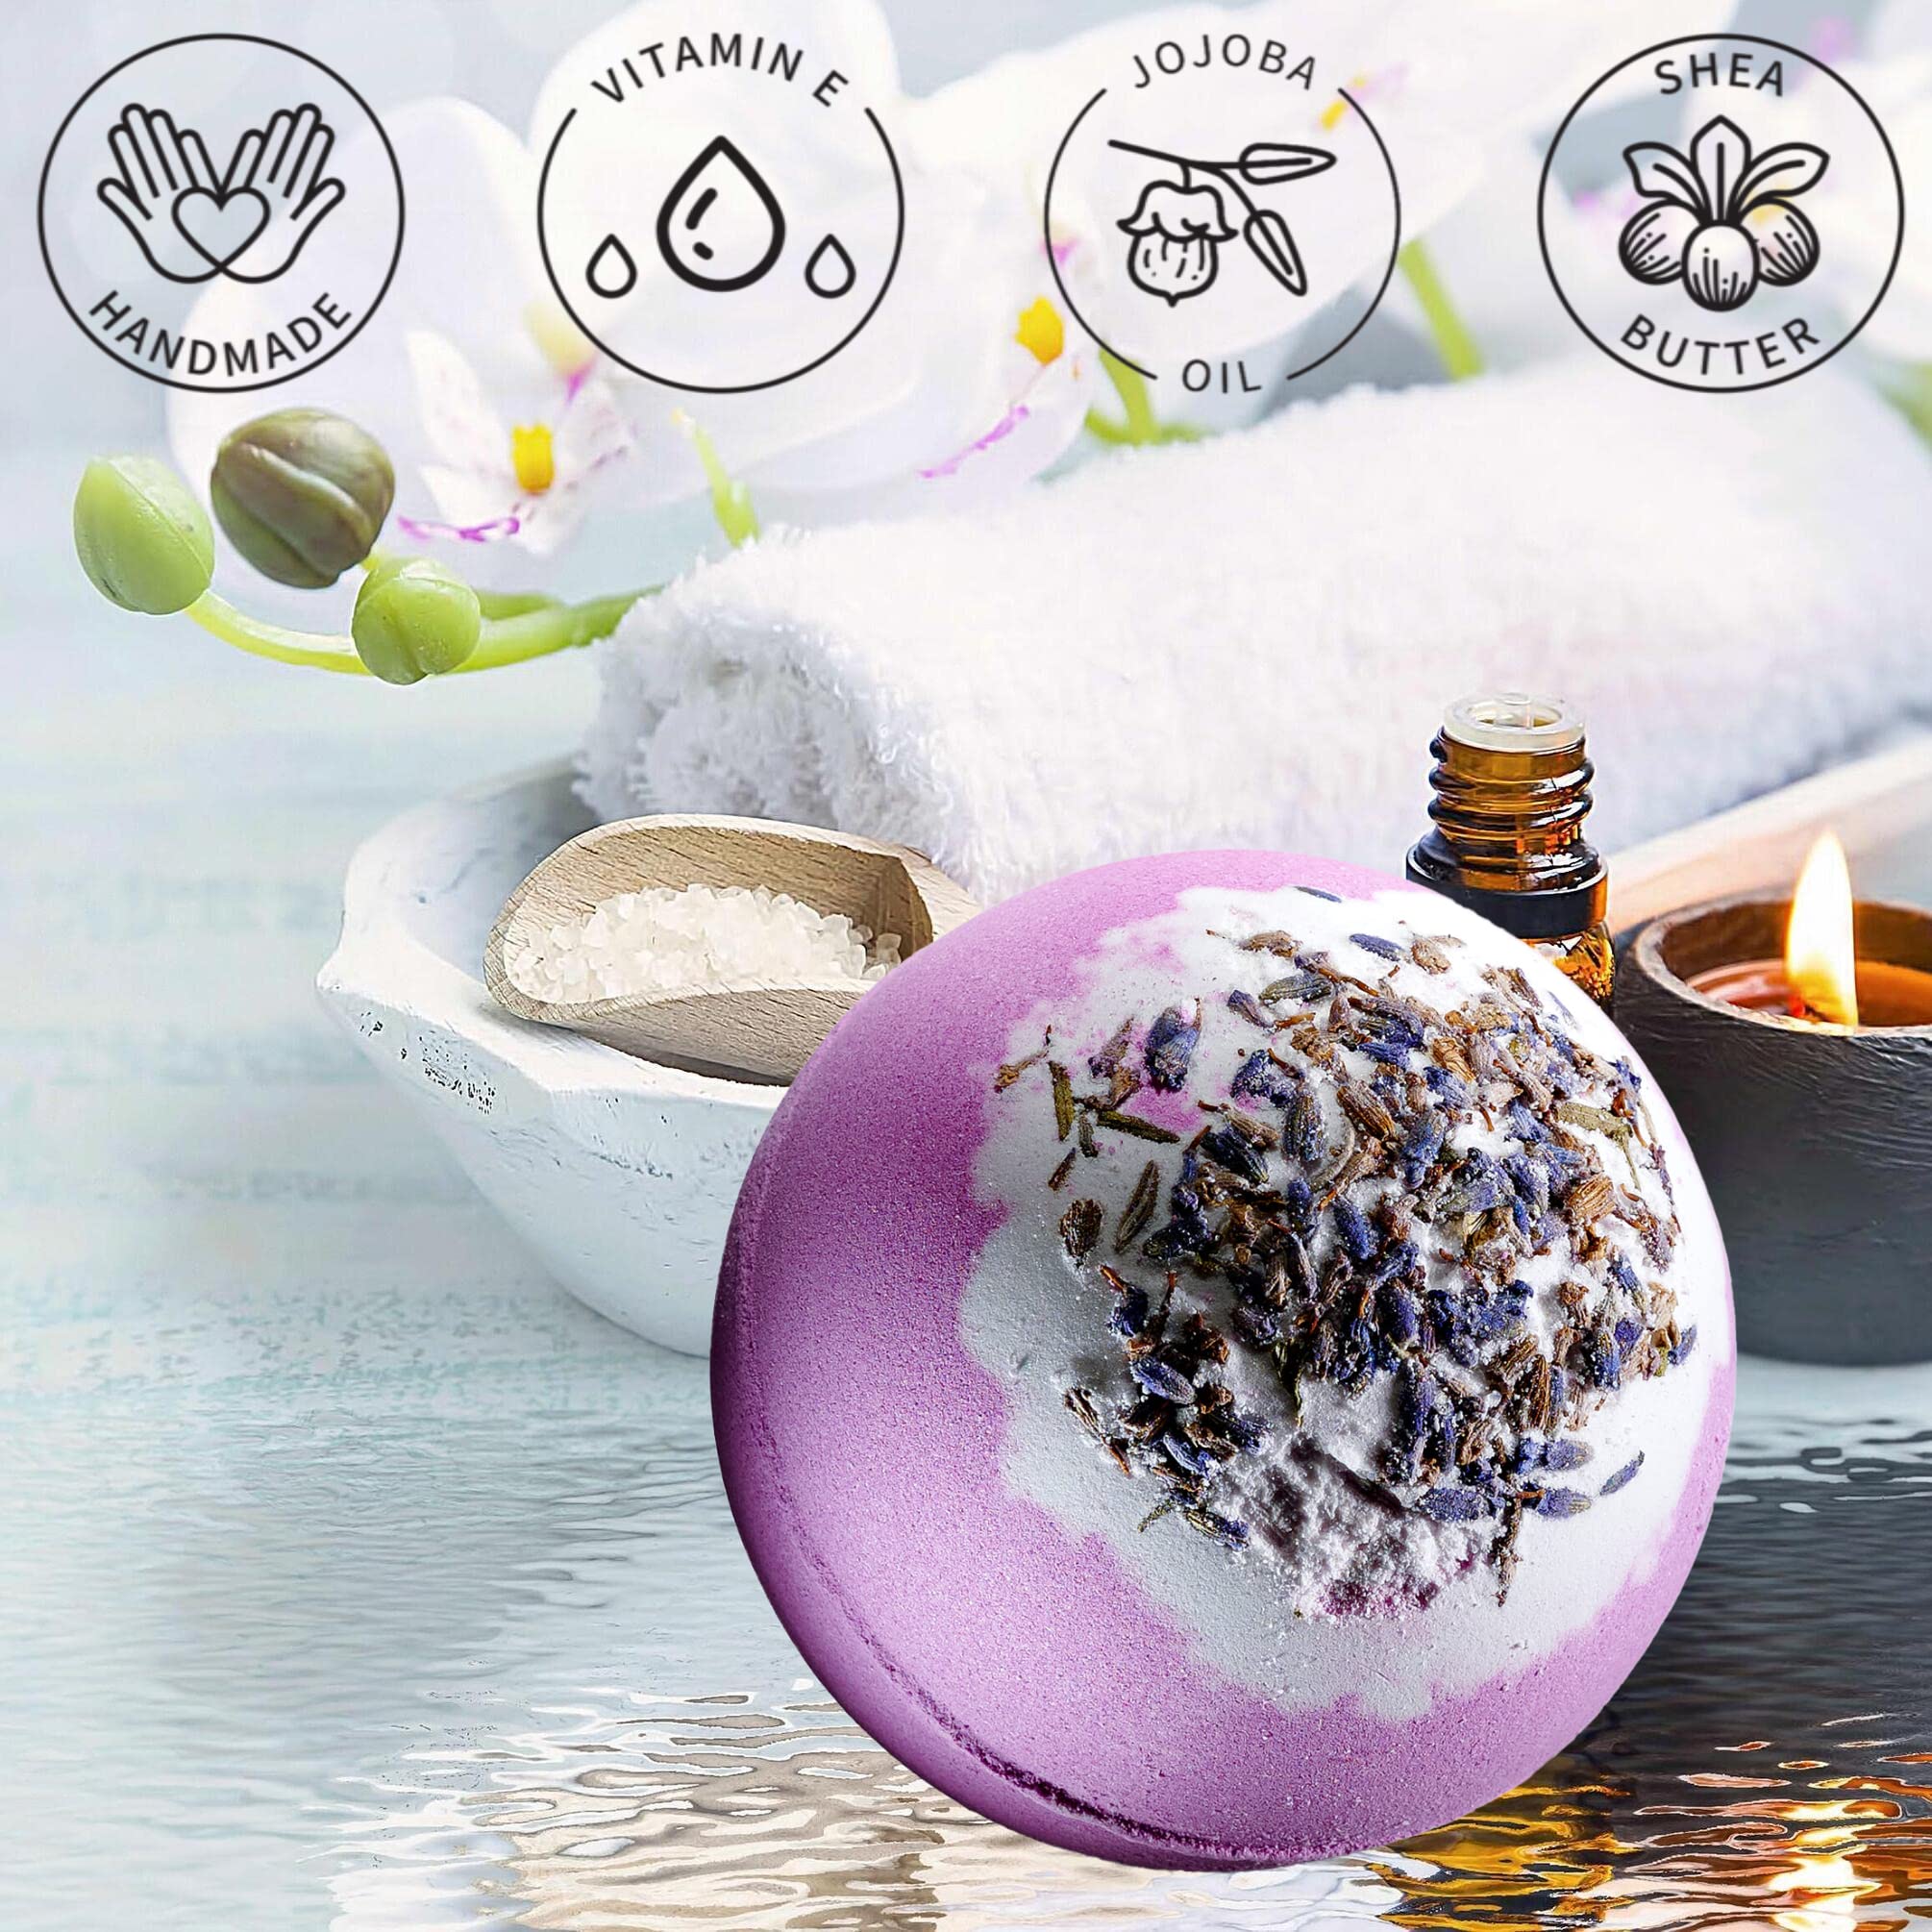 Lavender Bath Bombs for Women, Handmade Self Care Gifts for Relaxing and Relaxation Pampering Bath and Body Spa Ball, Birthday Gift Idea for Women, Men, Mom, Dad - 7oz Fizzy with Natural Lavender Oils